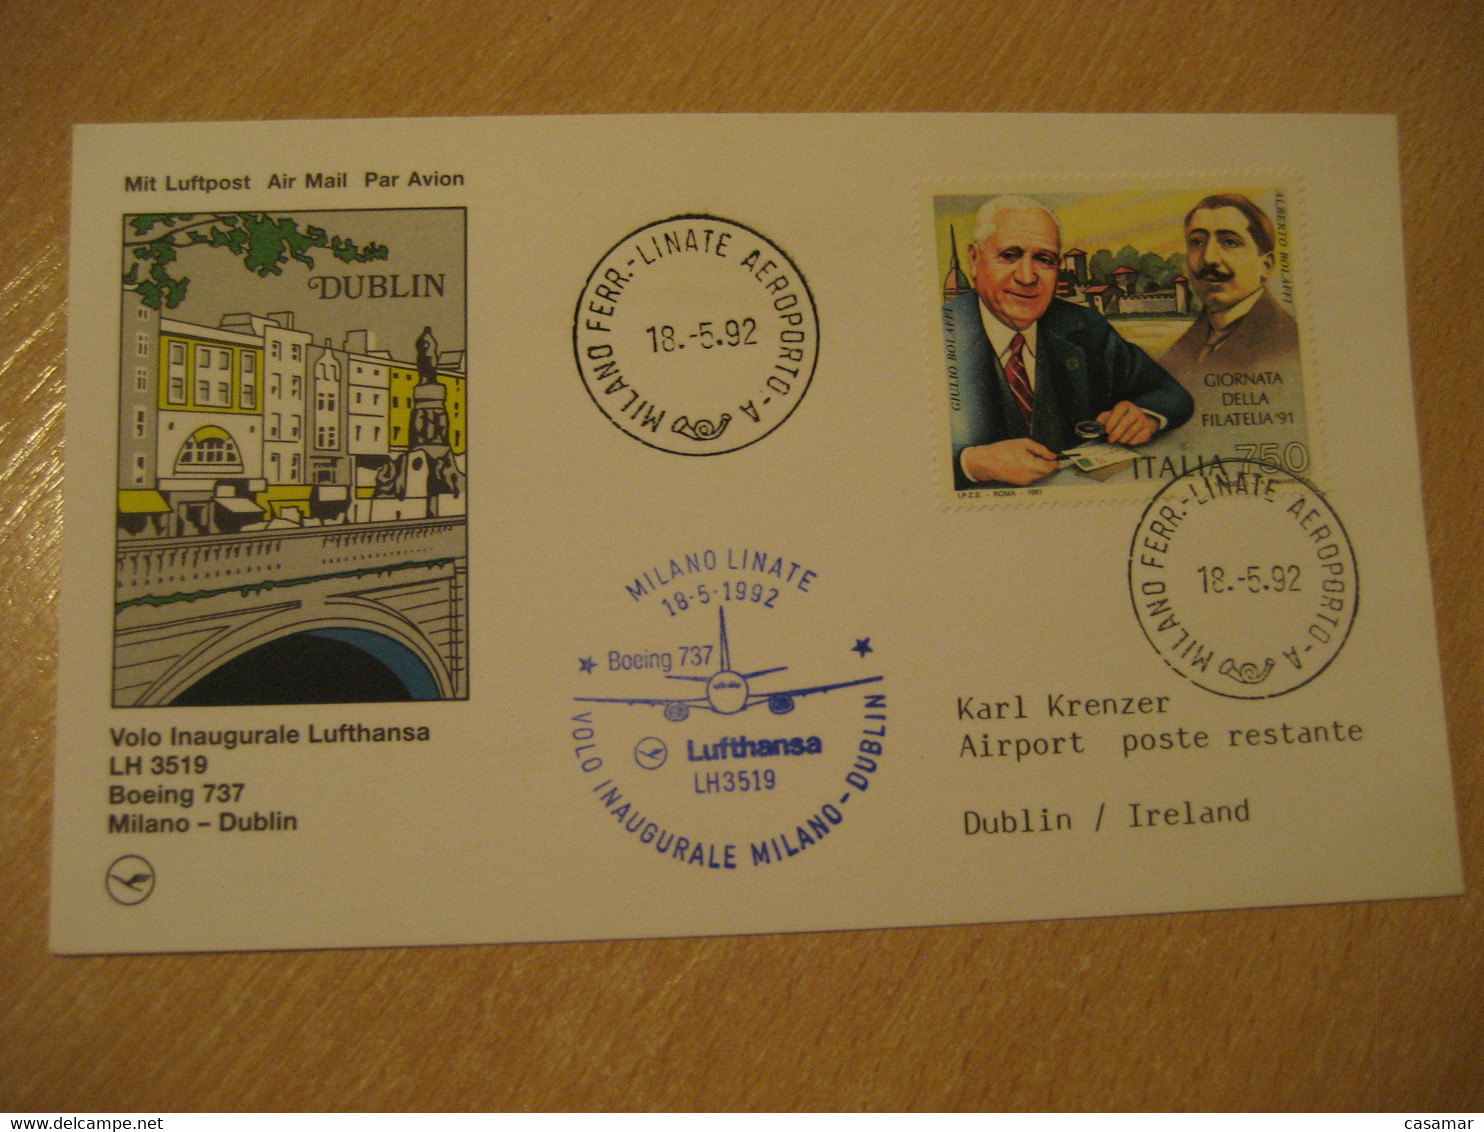 DUBLIN Milan 1992 Lufthansa Airlines Airline Boeing 737 First Flight Blue Cancel Card IRELAND ITALY GERMANY - Aéreo